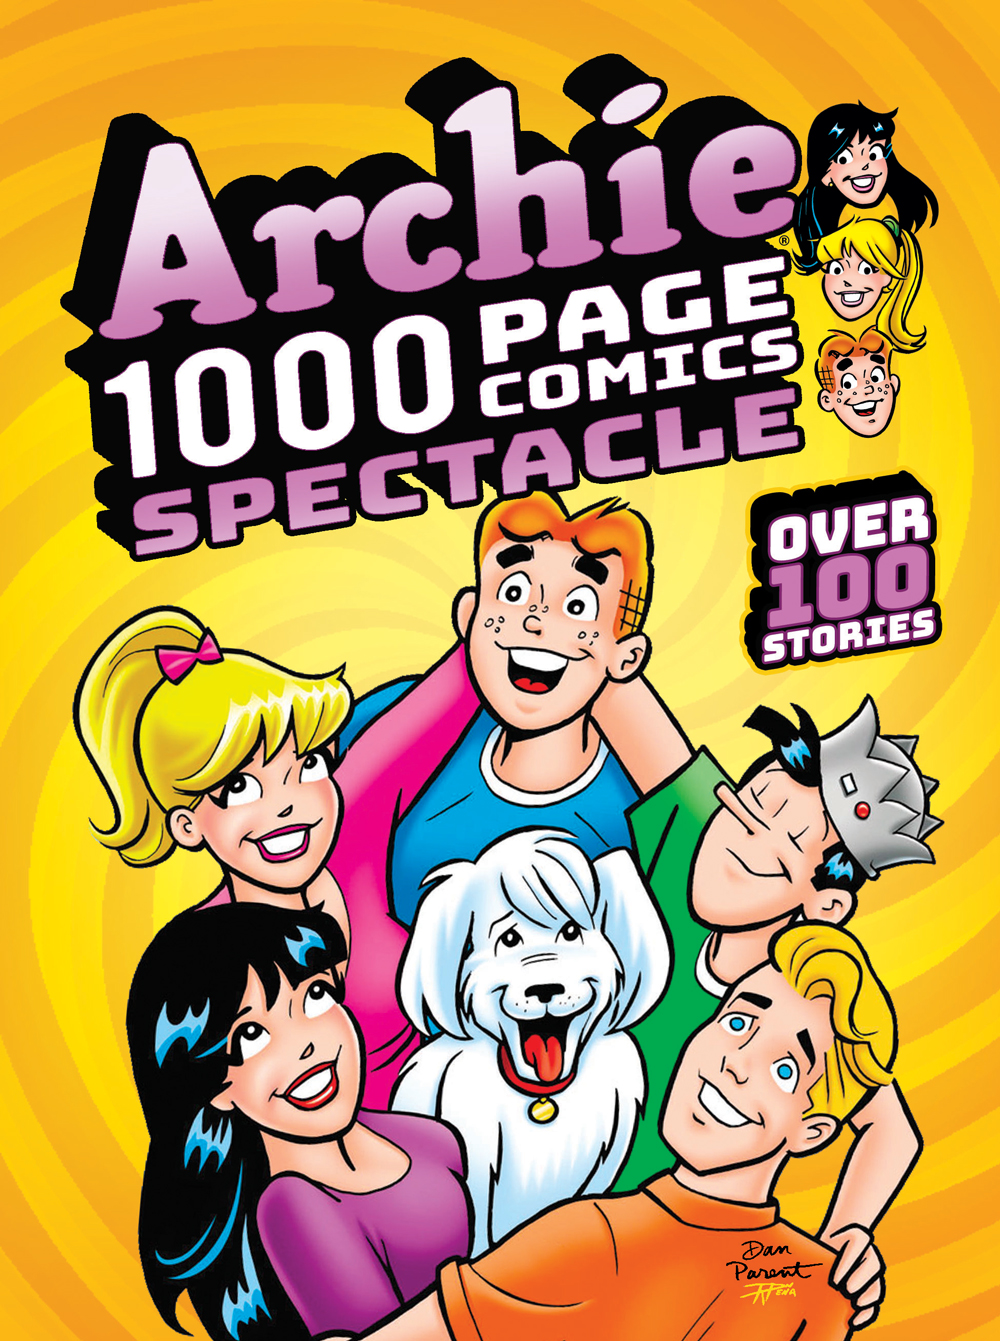 Veronica, Betty, Archie, Jughead, and Kevin Keller all stand in a circle around Jughead's dog Hot Dog, with their arms around each other. They're smiling and looking up at the book's title.